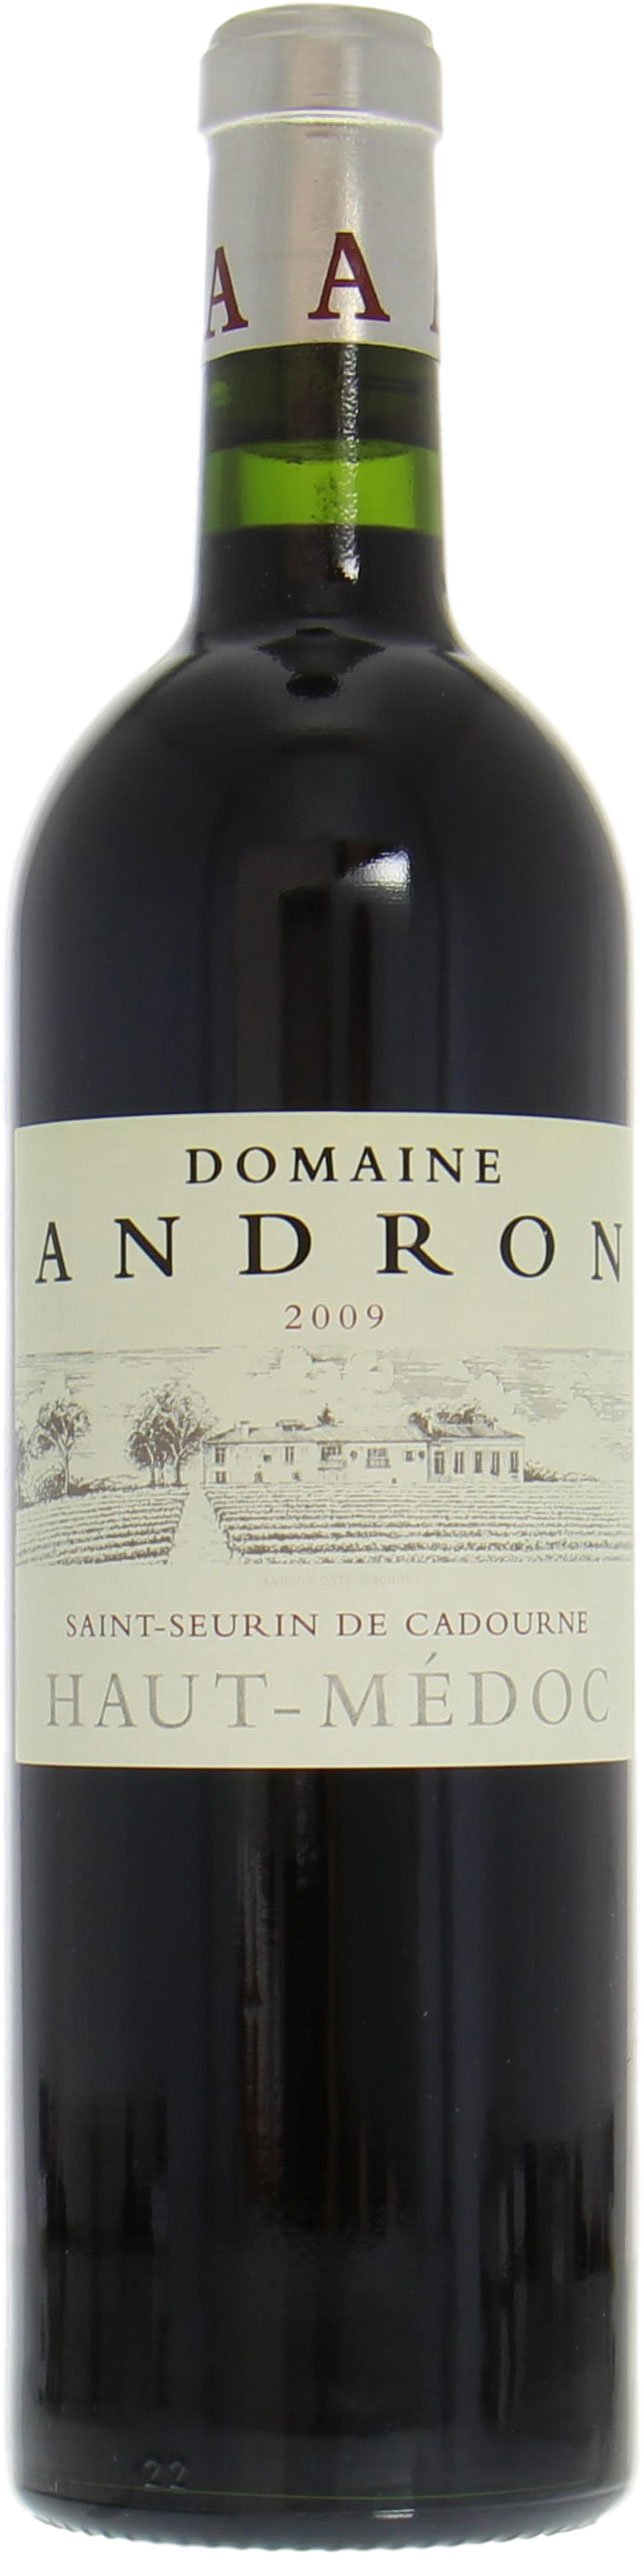 Domaine Andron - Domaine Andron 2009 From Original Wooden Case